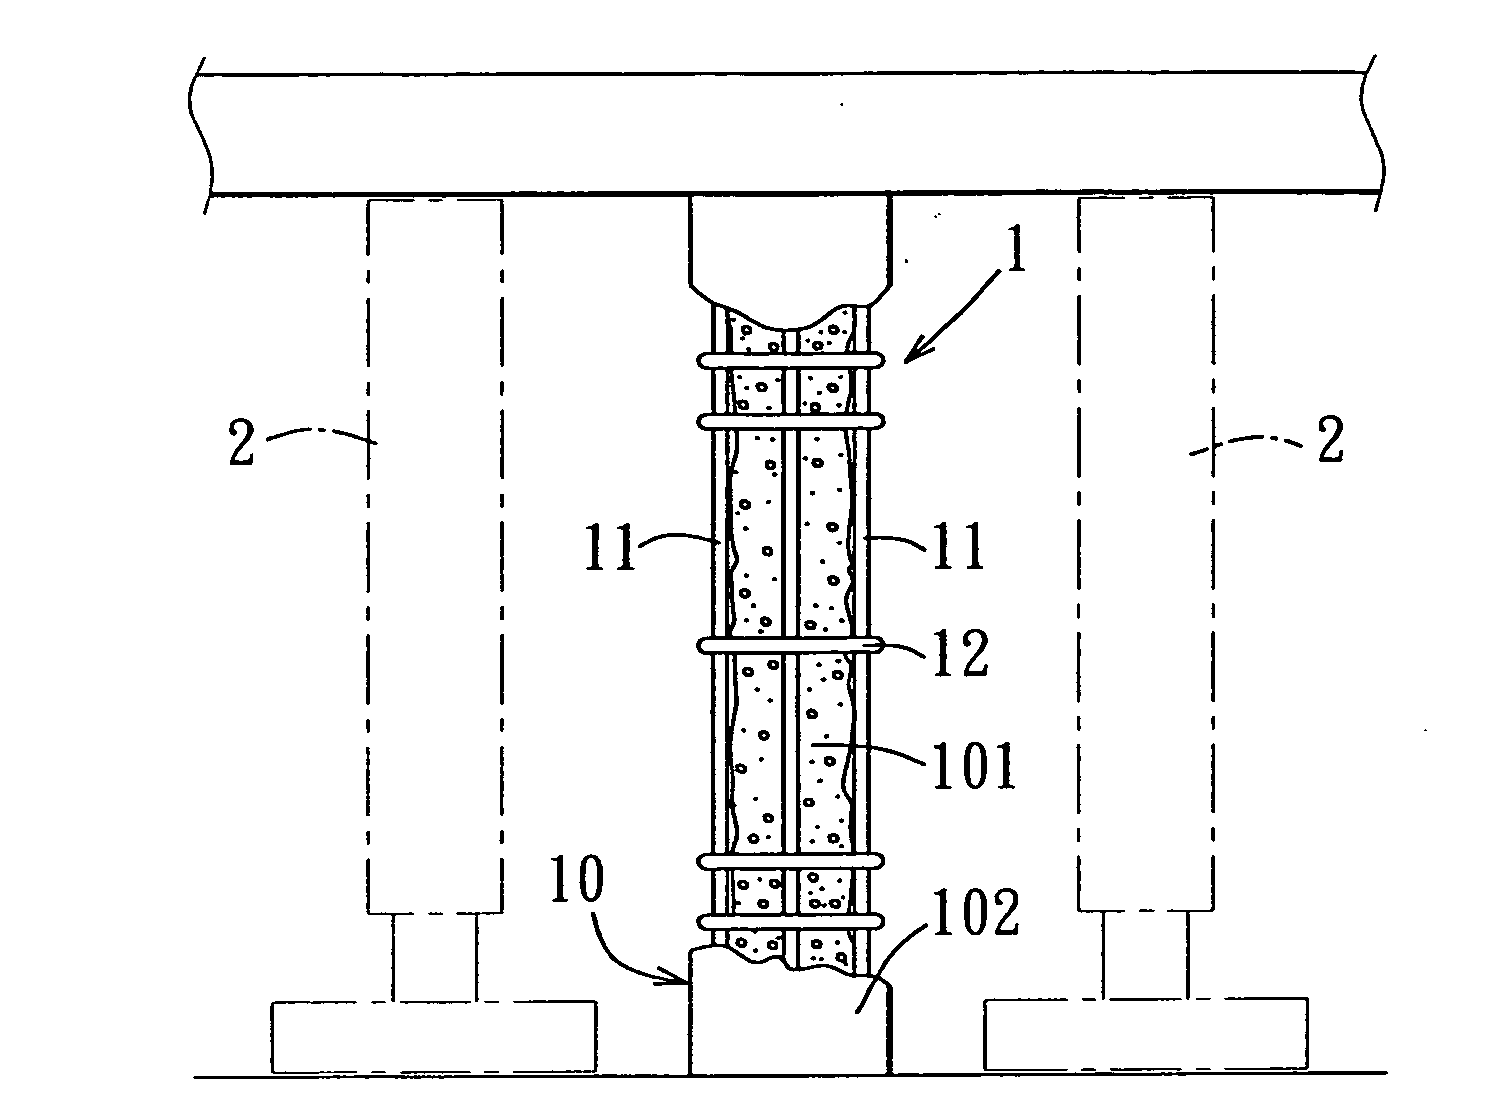 Method for strengthening or repairing an existing reinforced concrete structural element